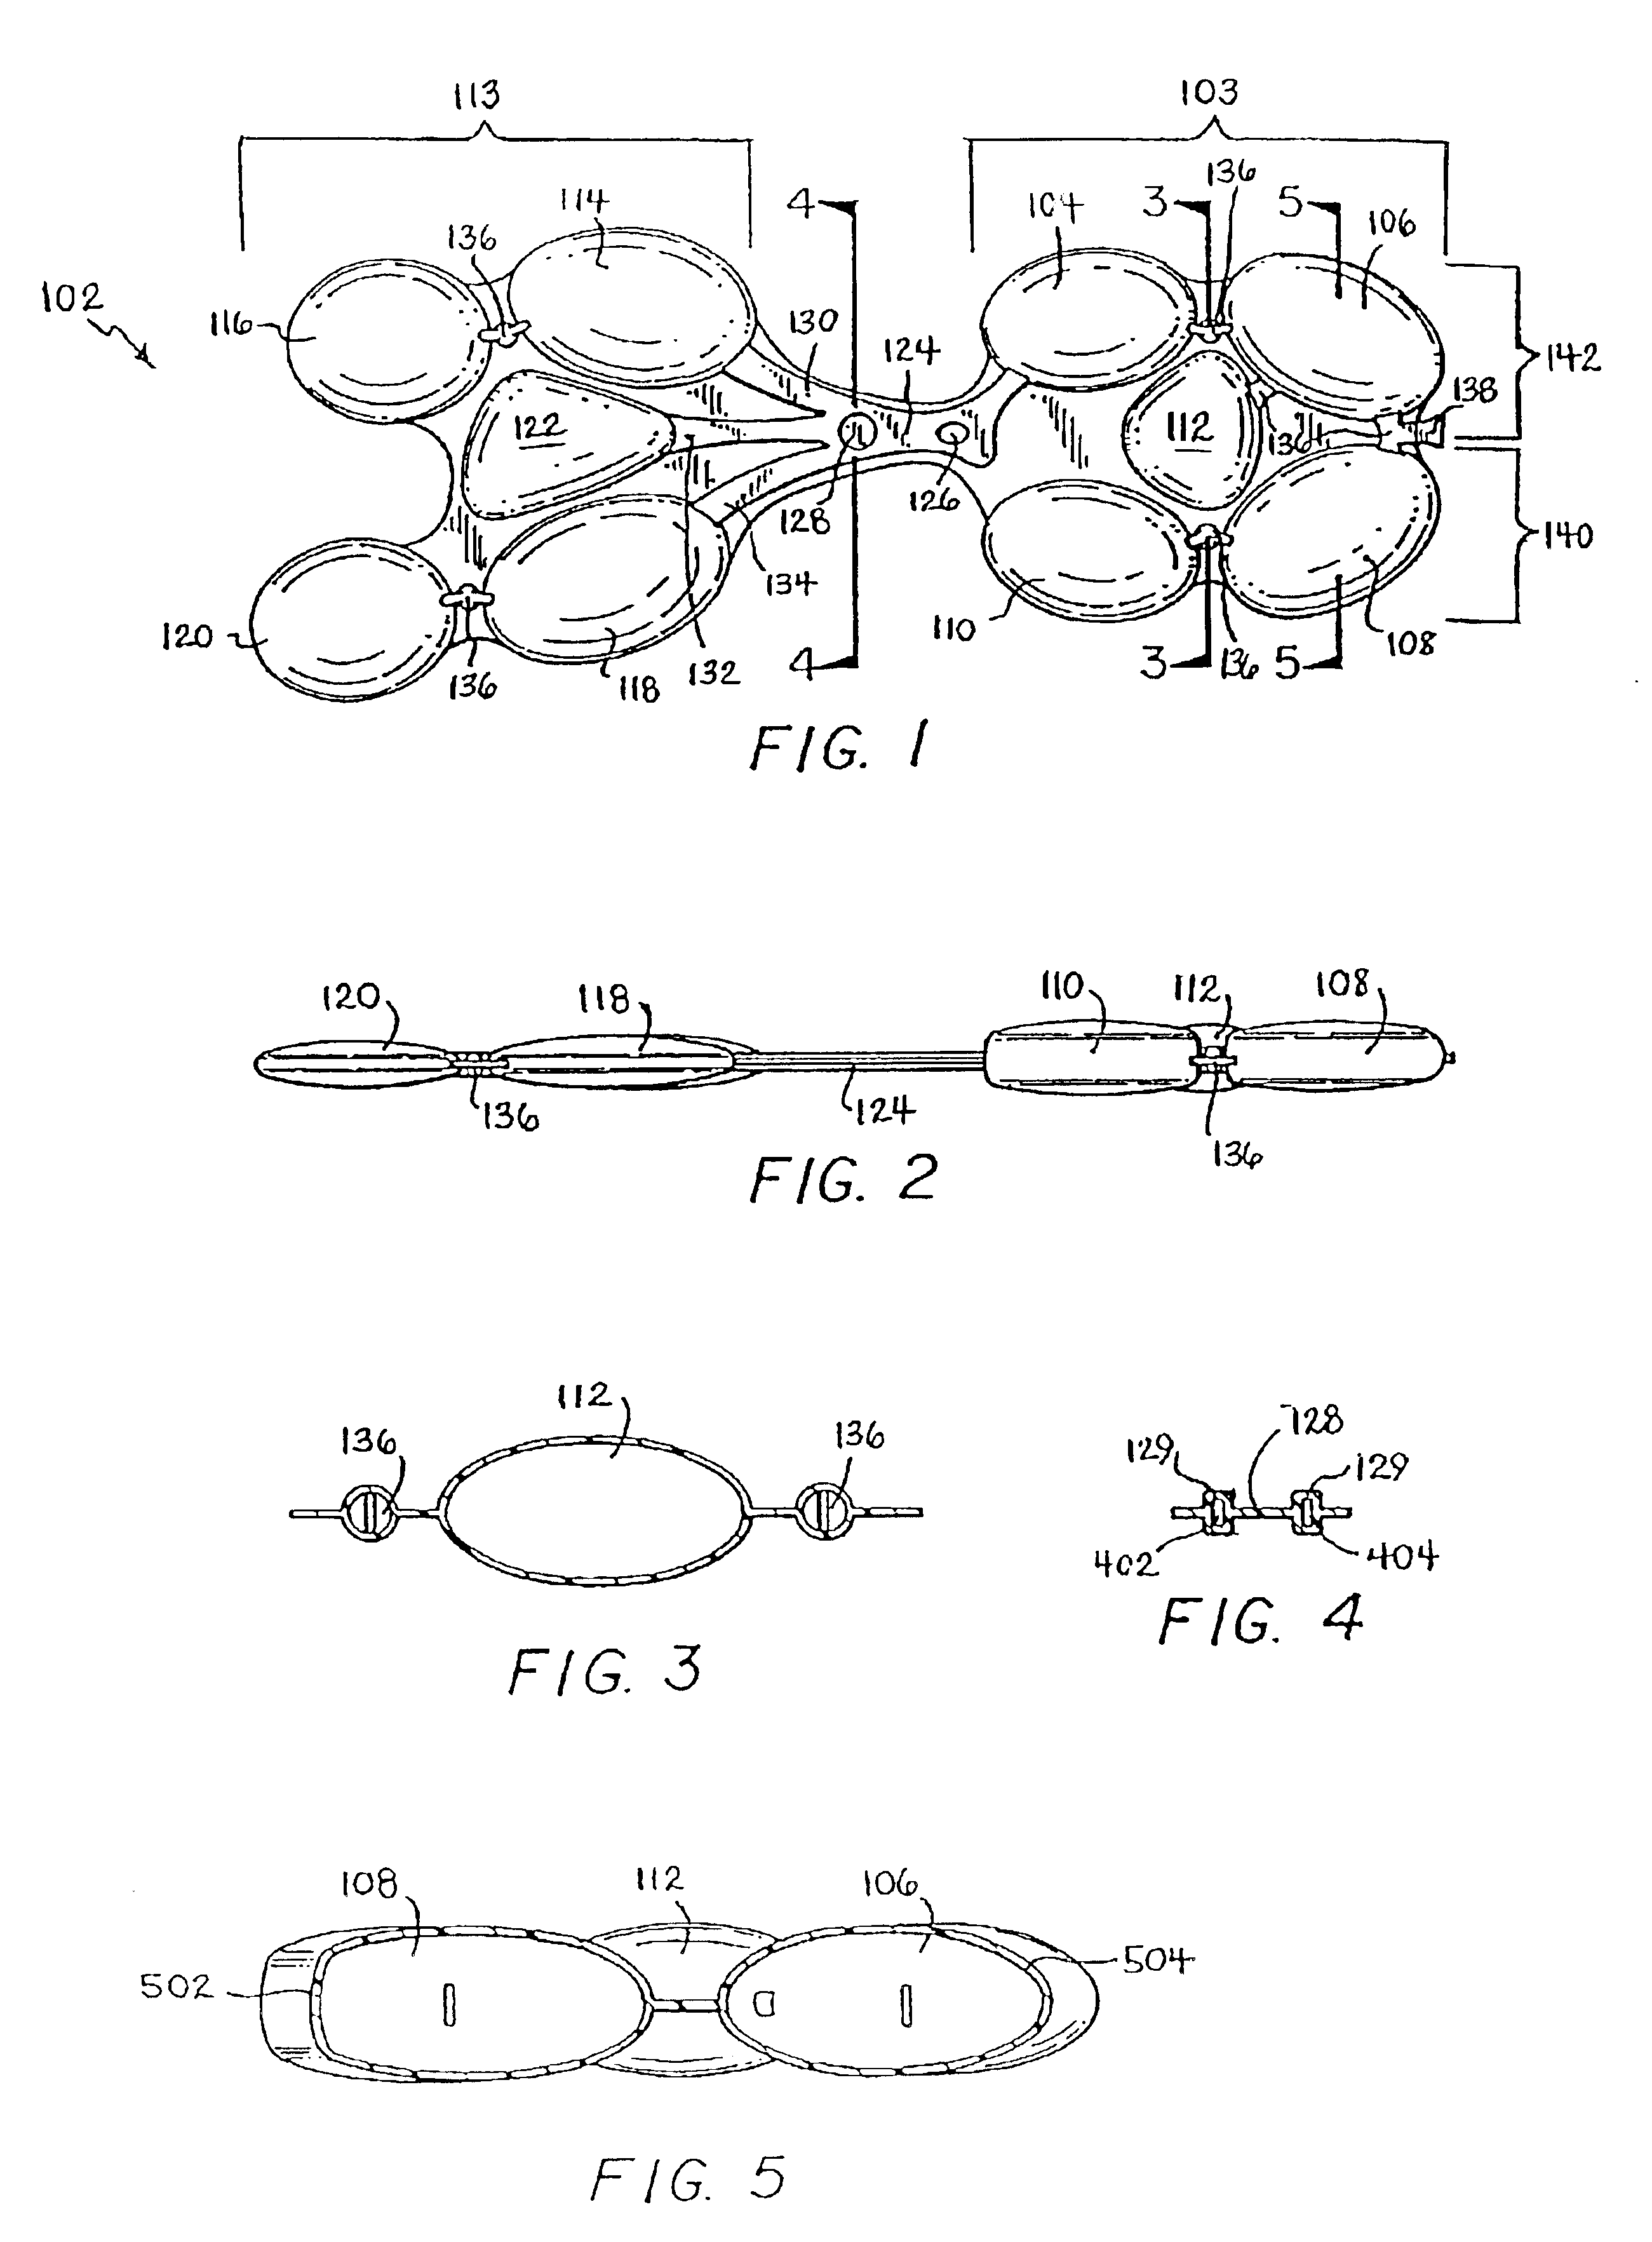 Support and cushioning system for an article of footwear